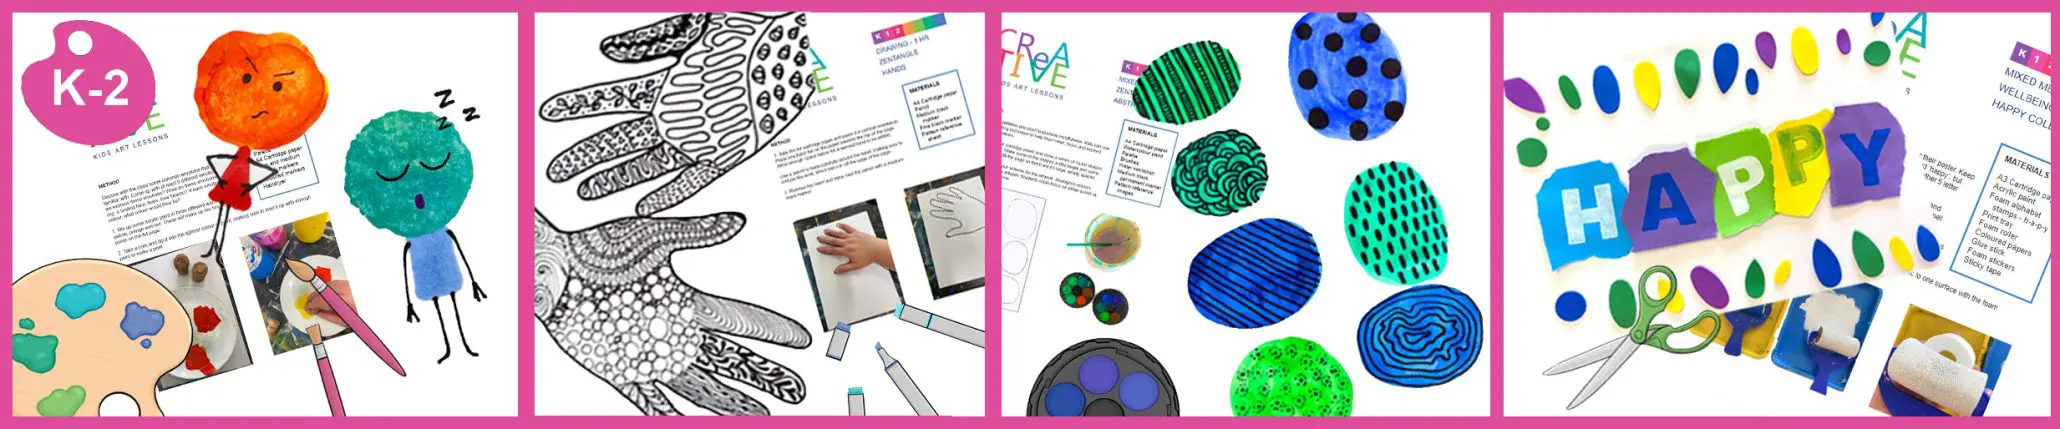 Wellbeing art lesson plans for Kinder, year 1 and year 2